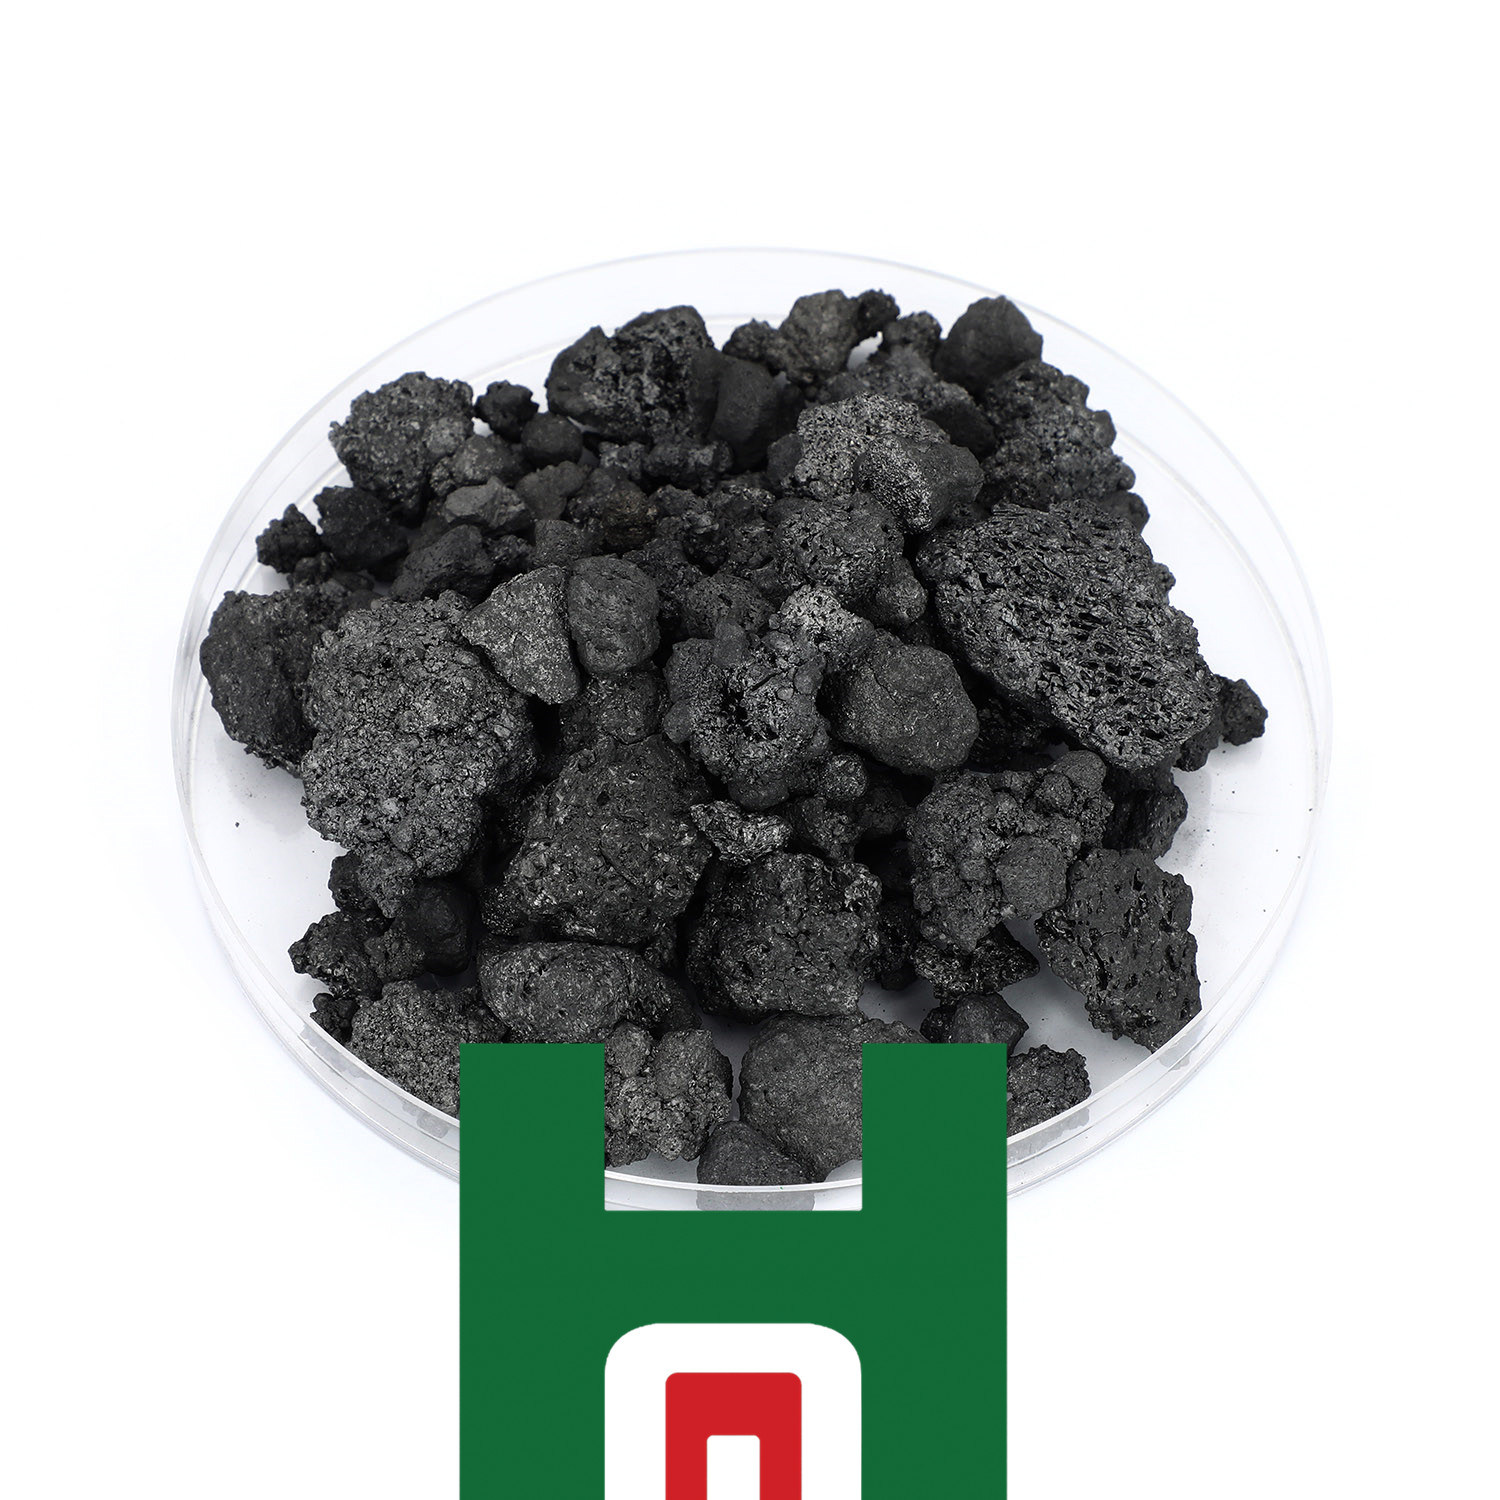 98% Black Sic Silicon Carbide for Abrasive Industry